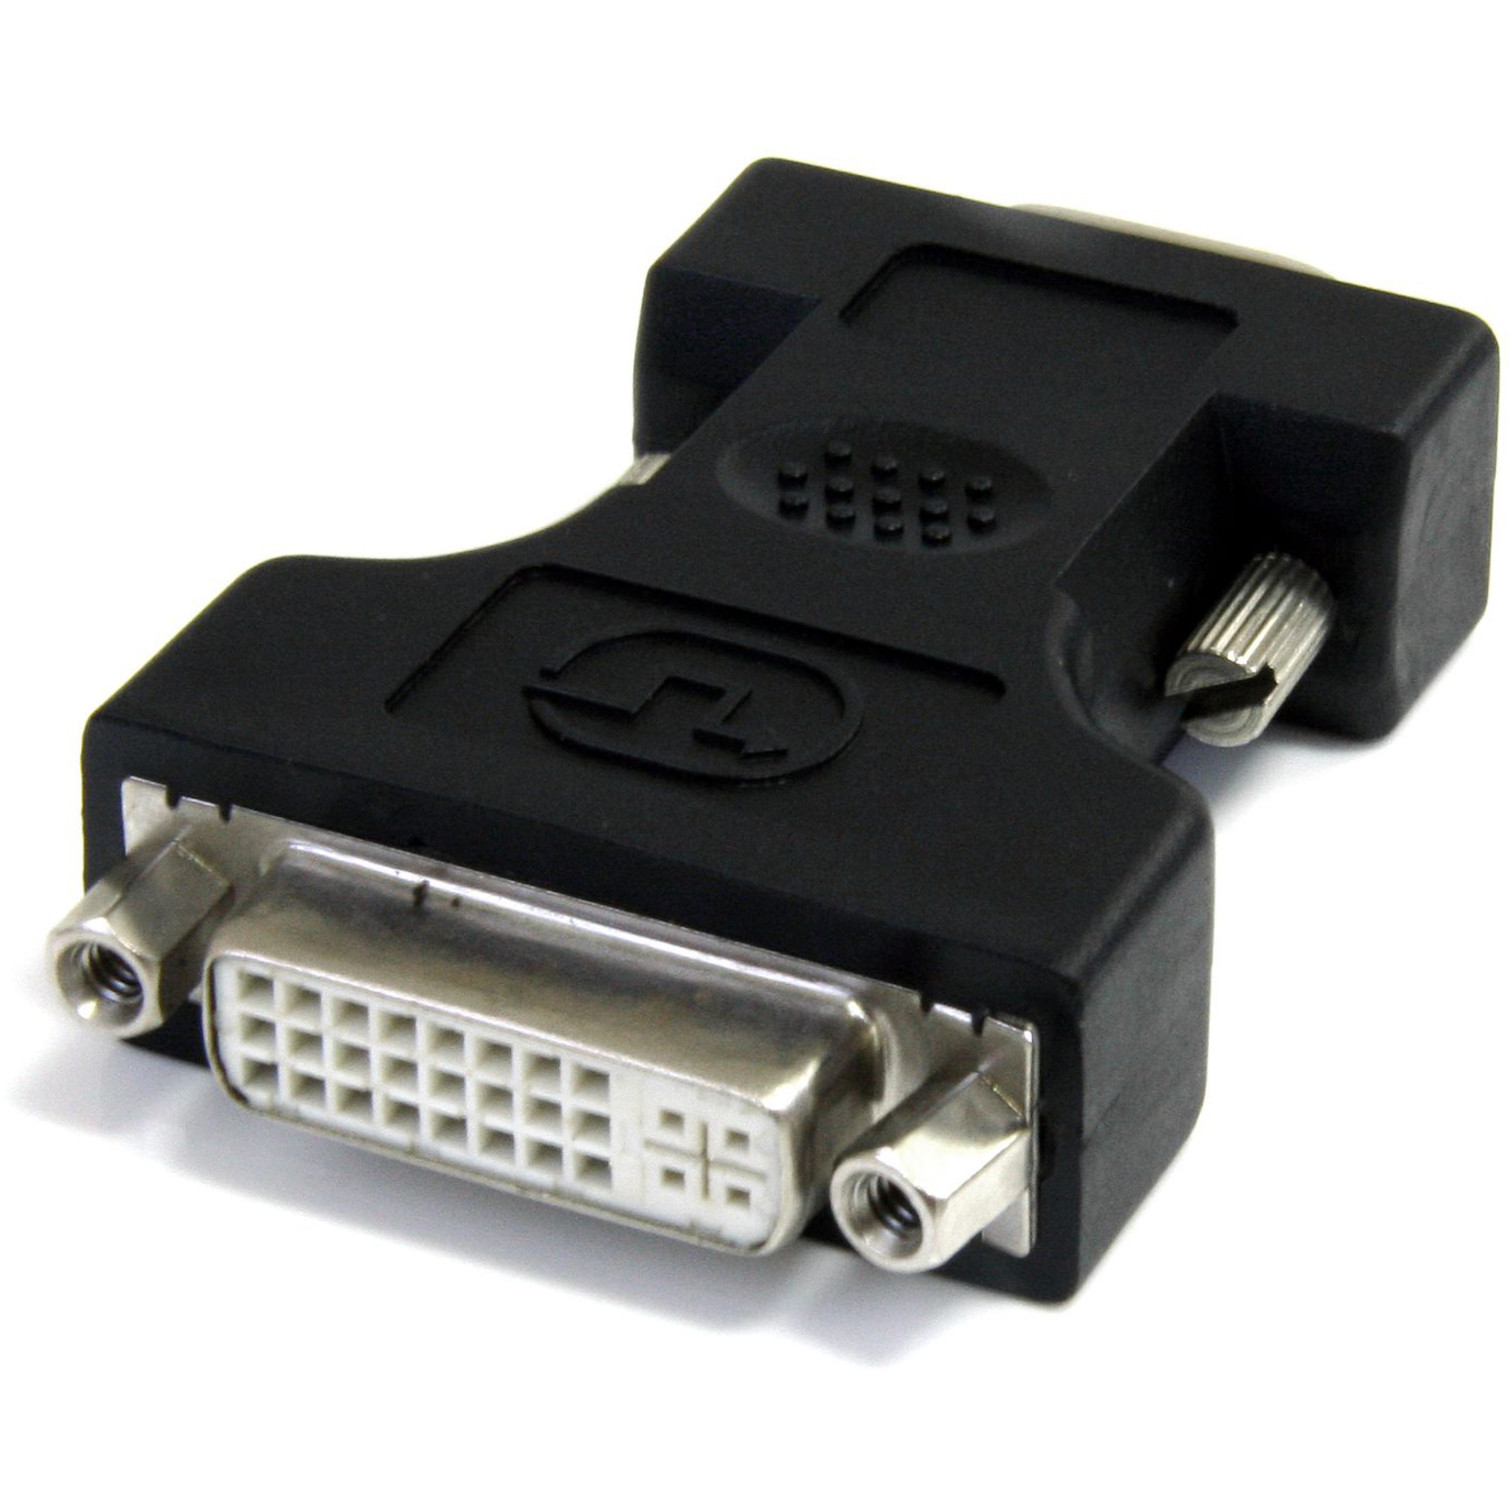 Startech .com DVI to VGA Cable AdapterBlackF/MUse your DVI-I Display with a VGA video cardDVI to VGAdvi to vga adapterdvi to… DVIVGAFMBK